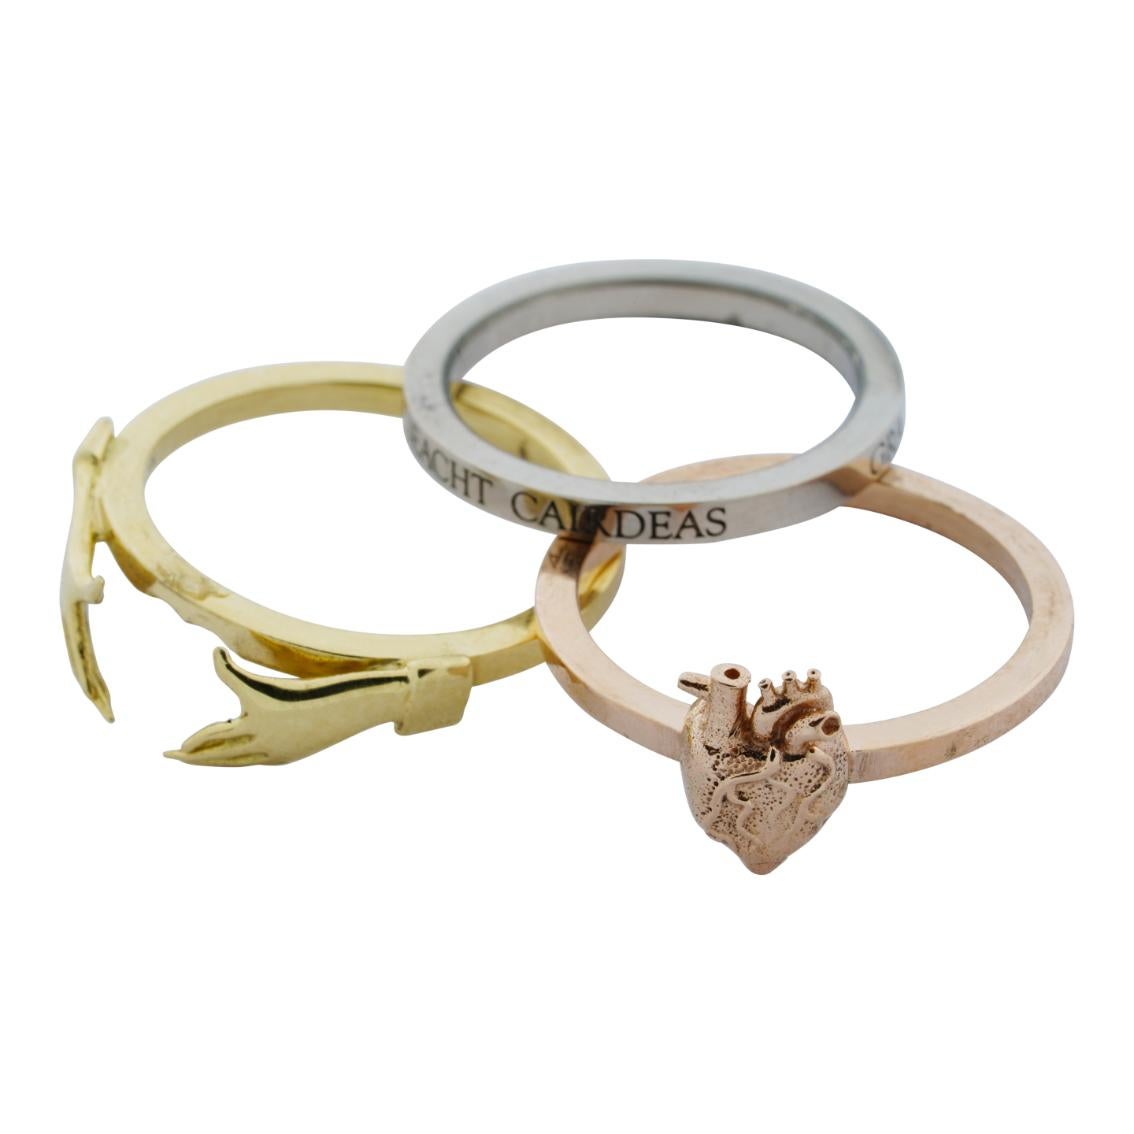 Renaissance Anatomical Heart & Claddagh Ring Set in 18kt Yellow, 18kt White & 18kt Rose Gold For Sale